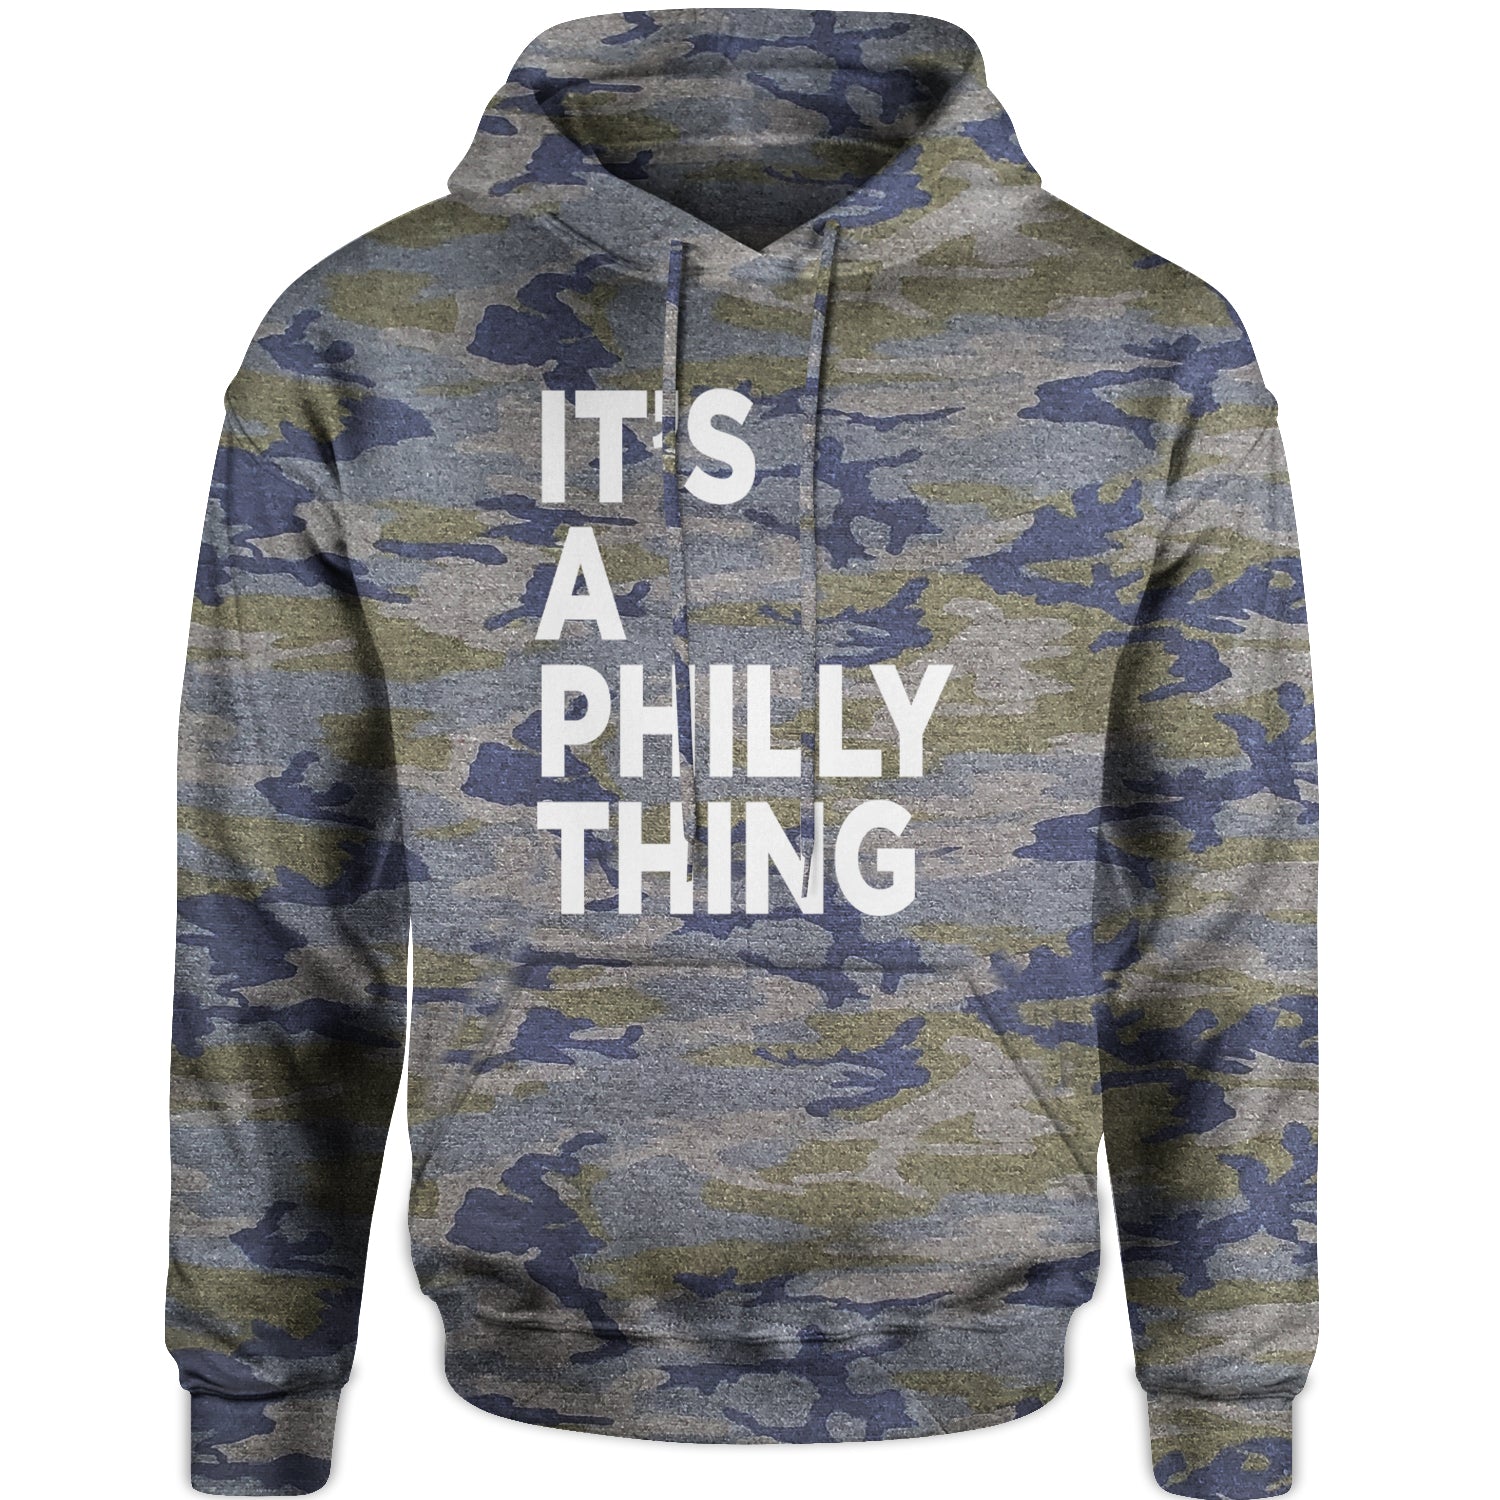 PHILLY It's A Philly Thing Adult Hoodie Sweatshirt baseball, dilly, filly, football, jawn, morgan, Philadelphia, philli by Expression Tees